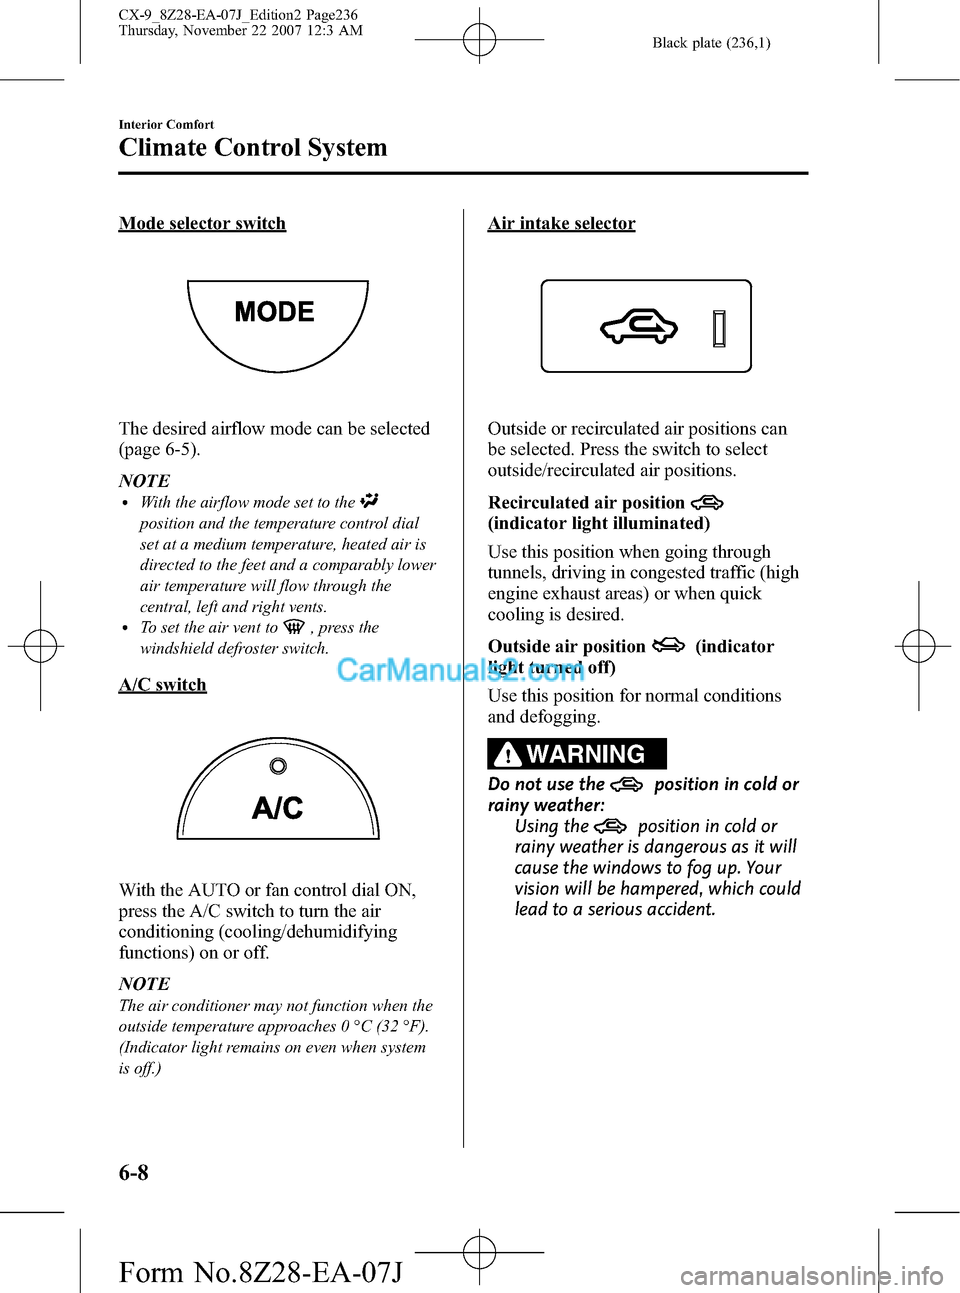 MAZDA MODEL CX-9 2008  Owners Manual (in English) Black plate (236,1)
Mode selector switch
The desired airflow mode can be selected
(page 6-5).
NOTE
lWith the airflow mode set to the
position and the temperature control dial
set at a medium temperatu